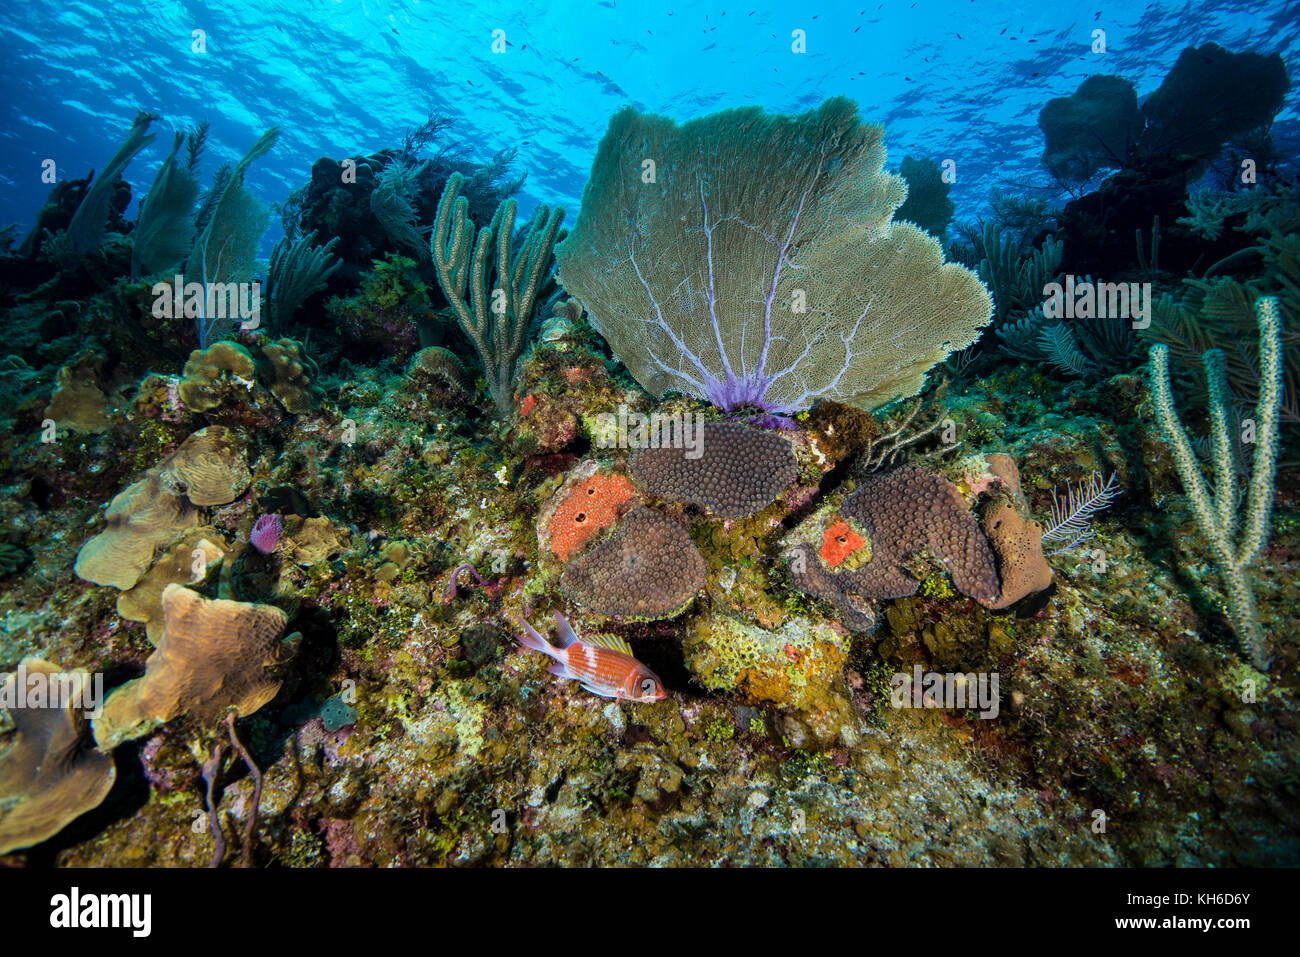 Underwater seascape and sea fan at Little Cayman in the Caribbean Stock Photo